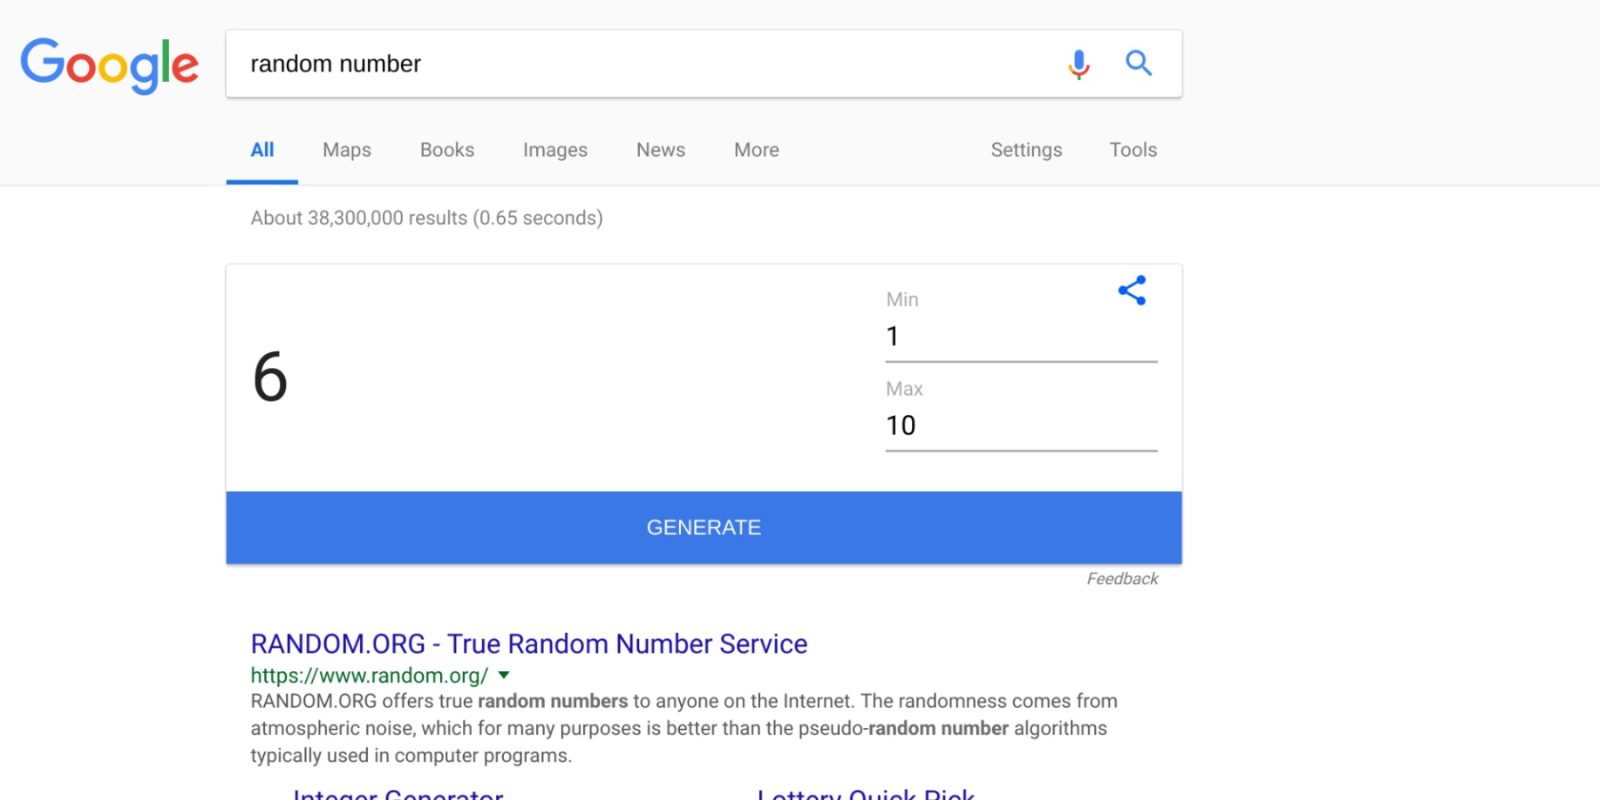 satisfaction nationalism the mall How to generate a random number right from Google's homepage